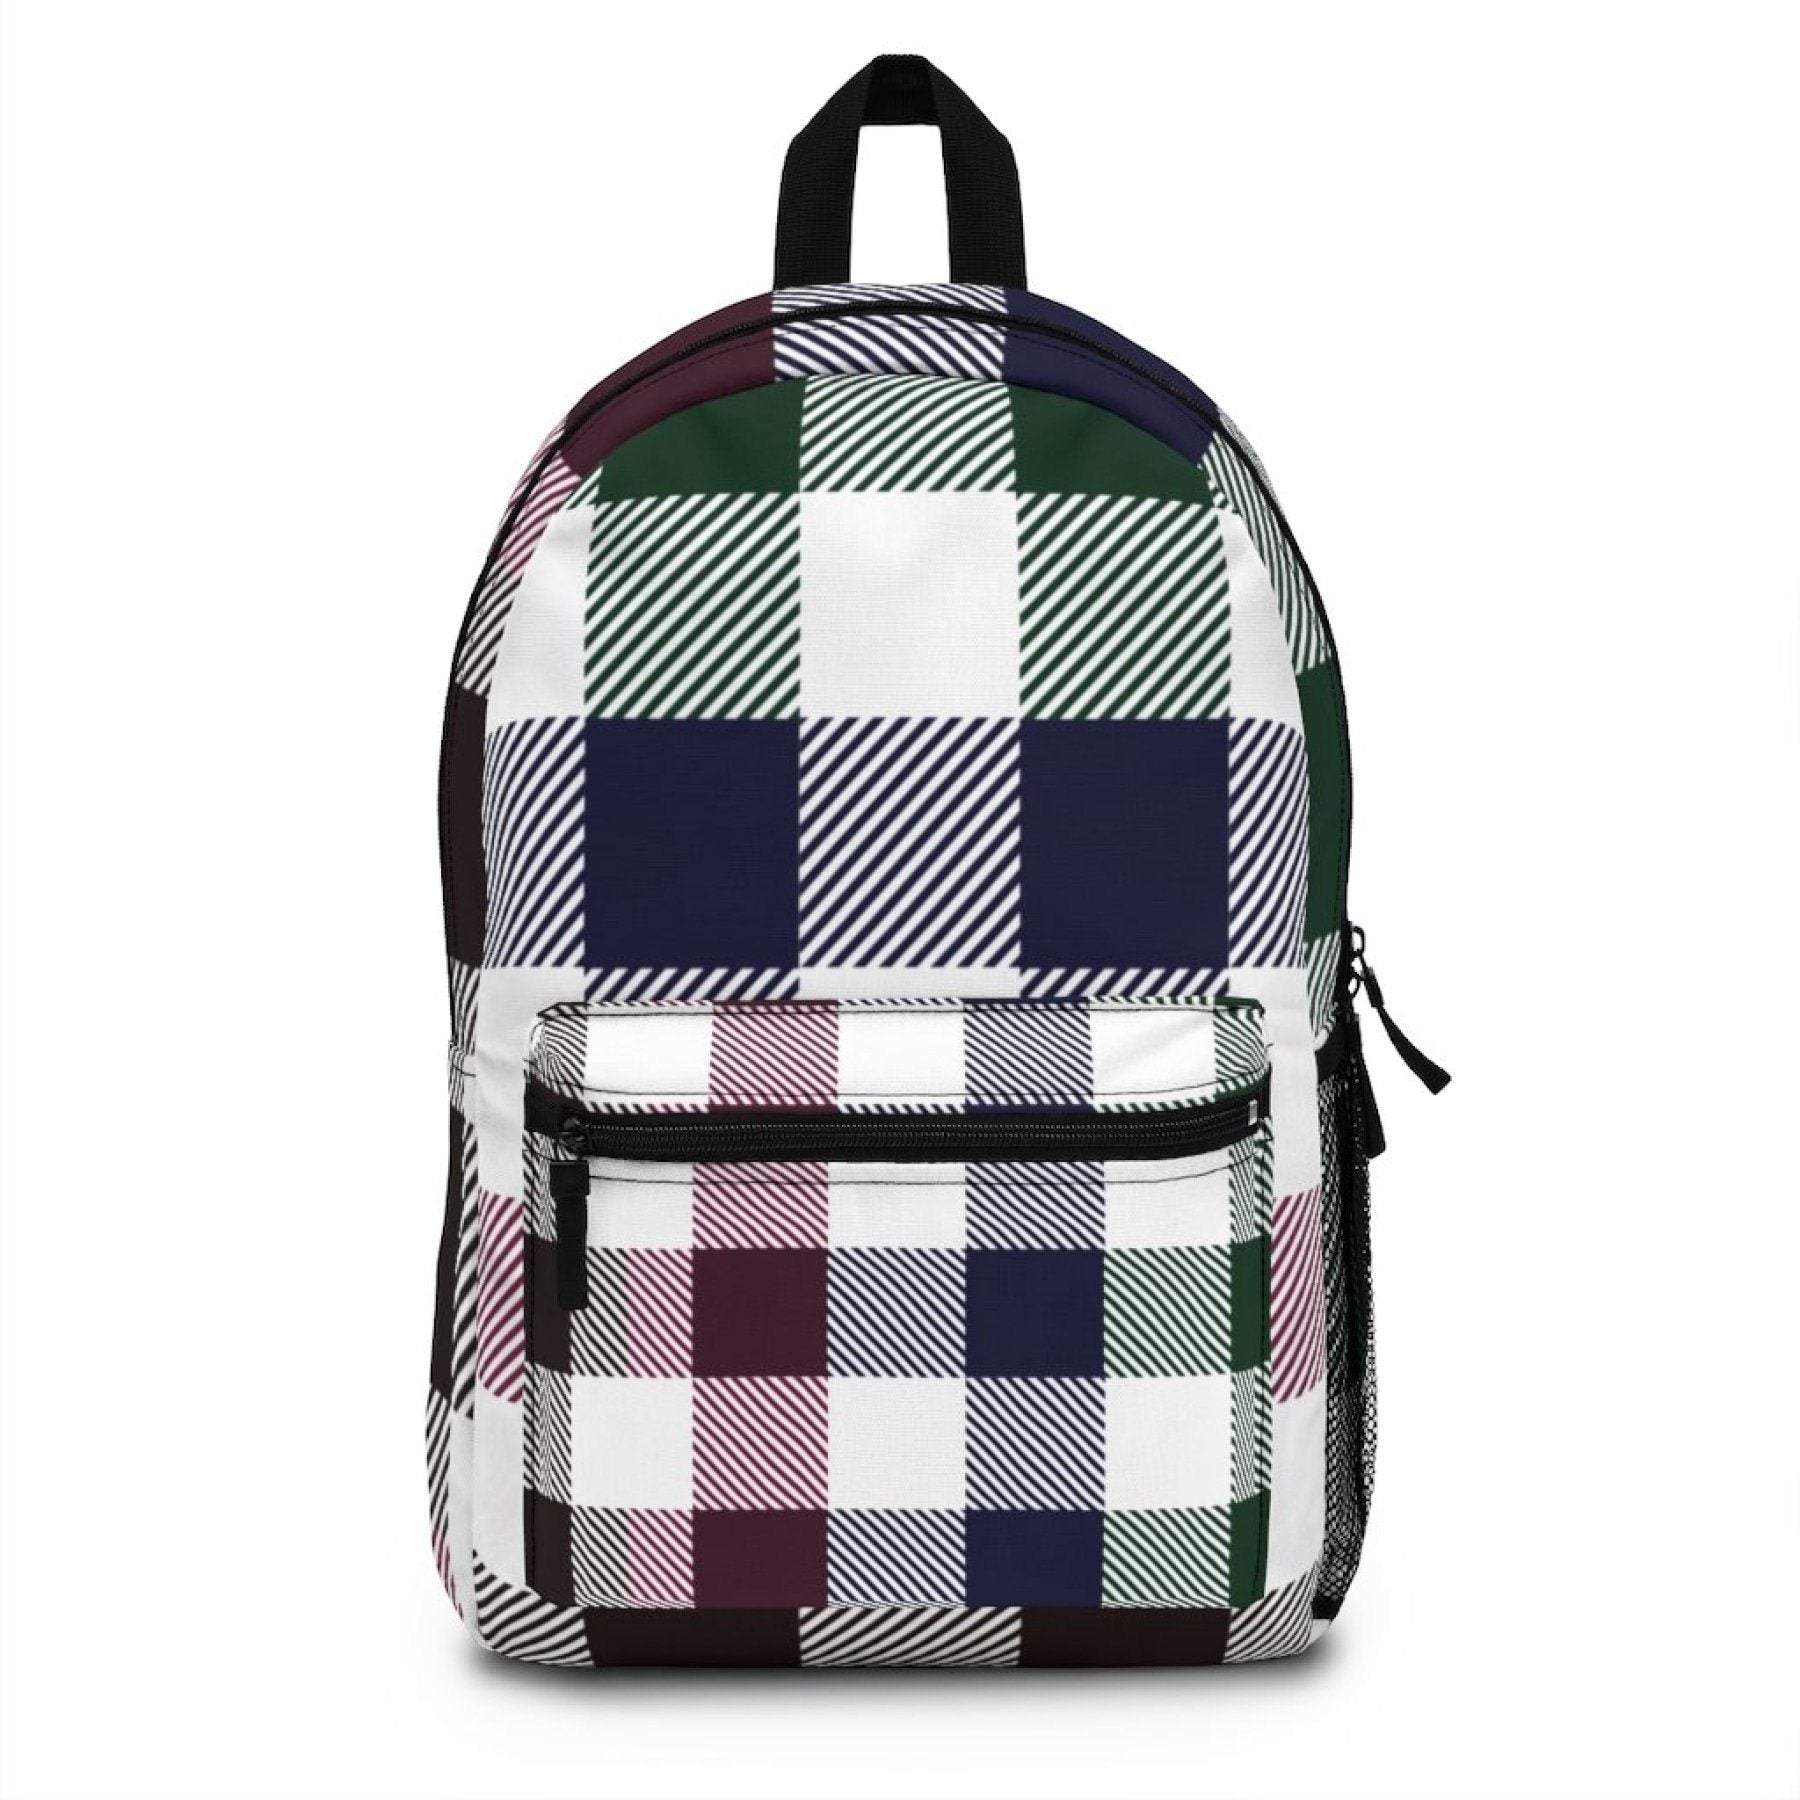 A Doba Canvas Double Shoulder Strap Plaid Grid Design Backpack Bag in White and Multicolor on a white background.